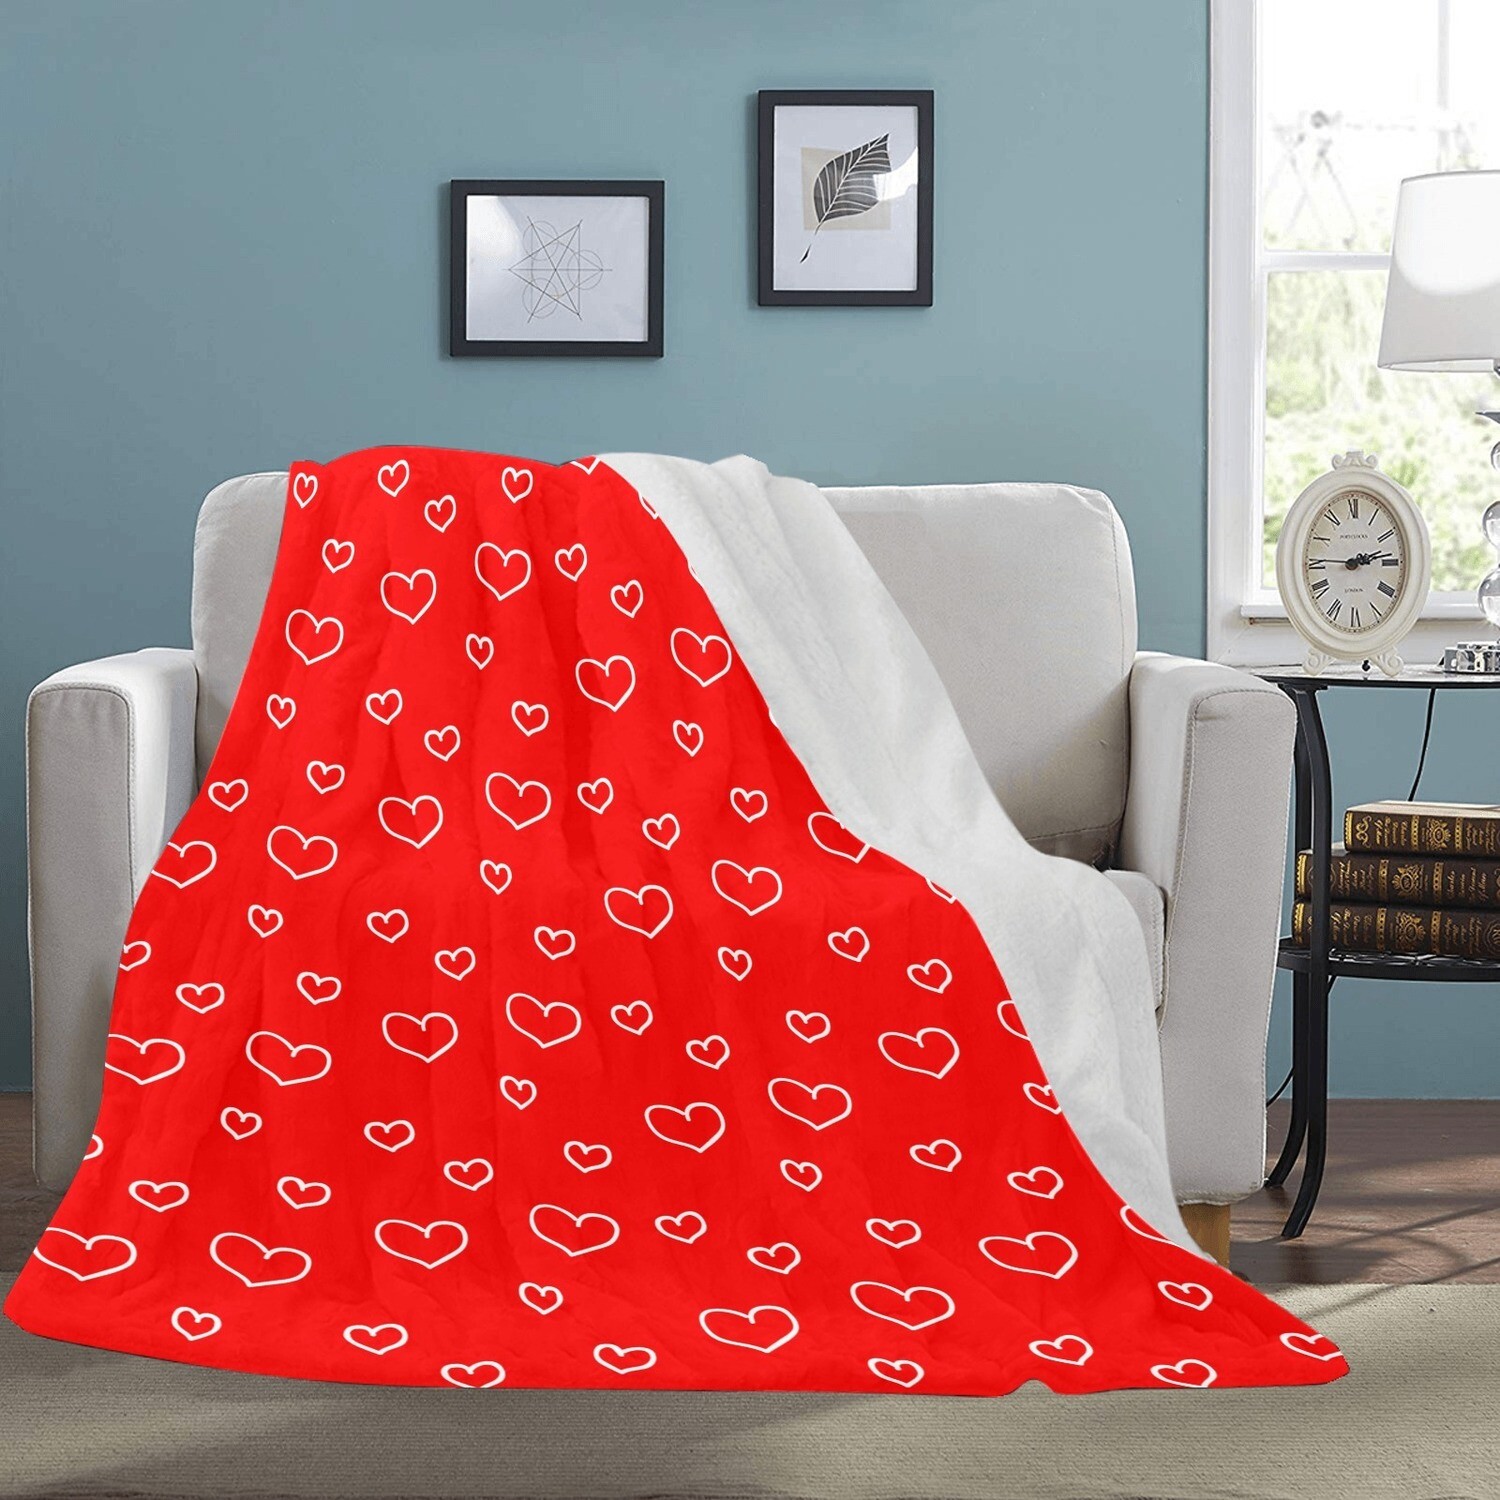 🤴🏽👸🏽💕Large Ultra-Soft Micro Fleece Blanket Valentine white outline hearts on red, gift, gift for her, gift for him, gift for them, 70"x80"